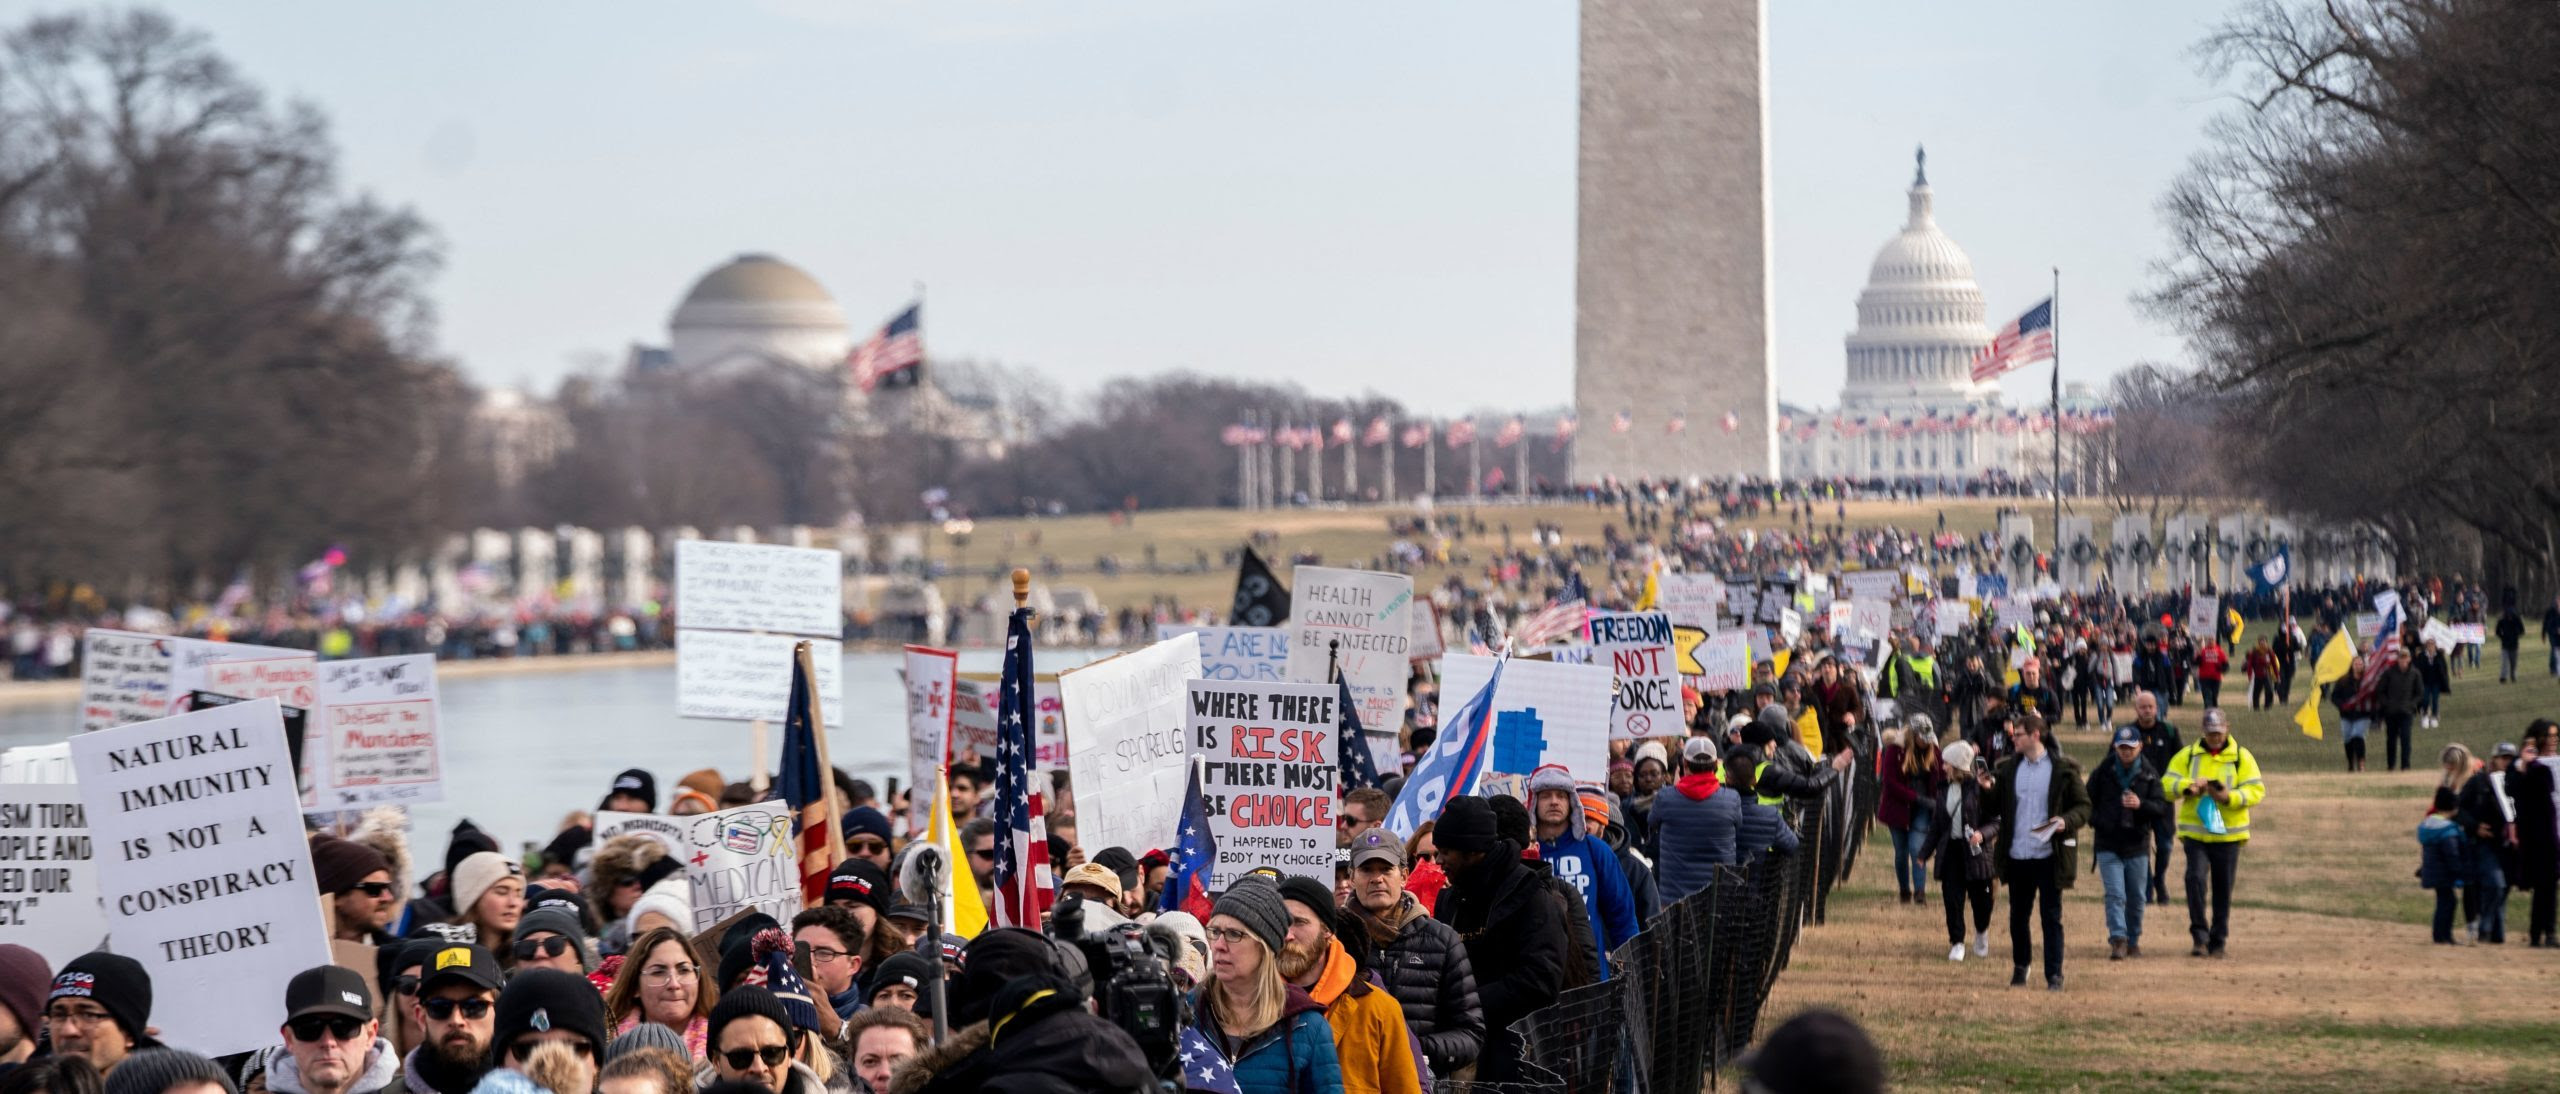 Over 30,000 People Marched To ‘Defeat the Mandates’ In Washington D.C.